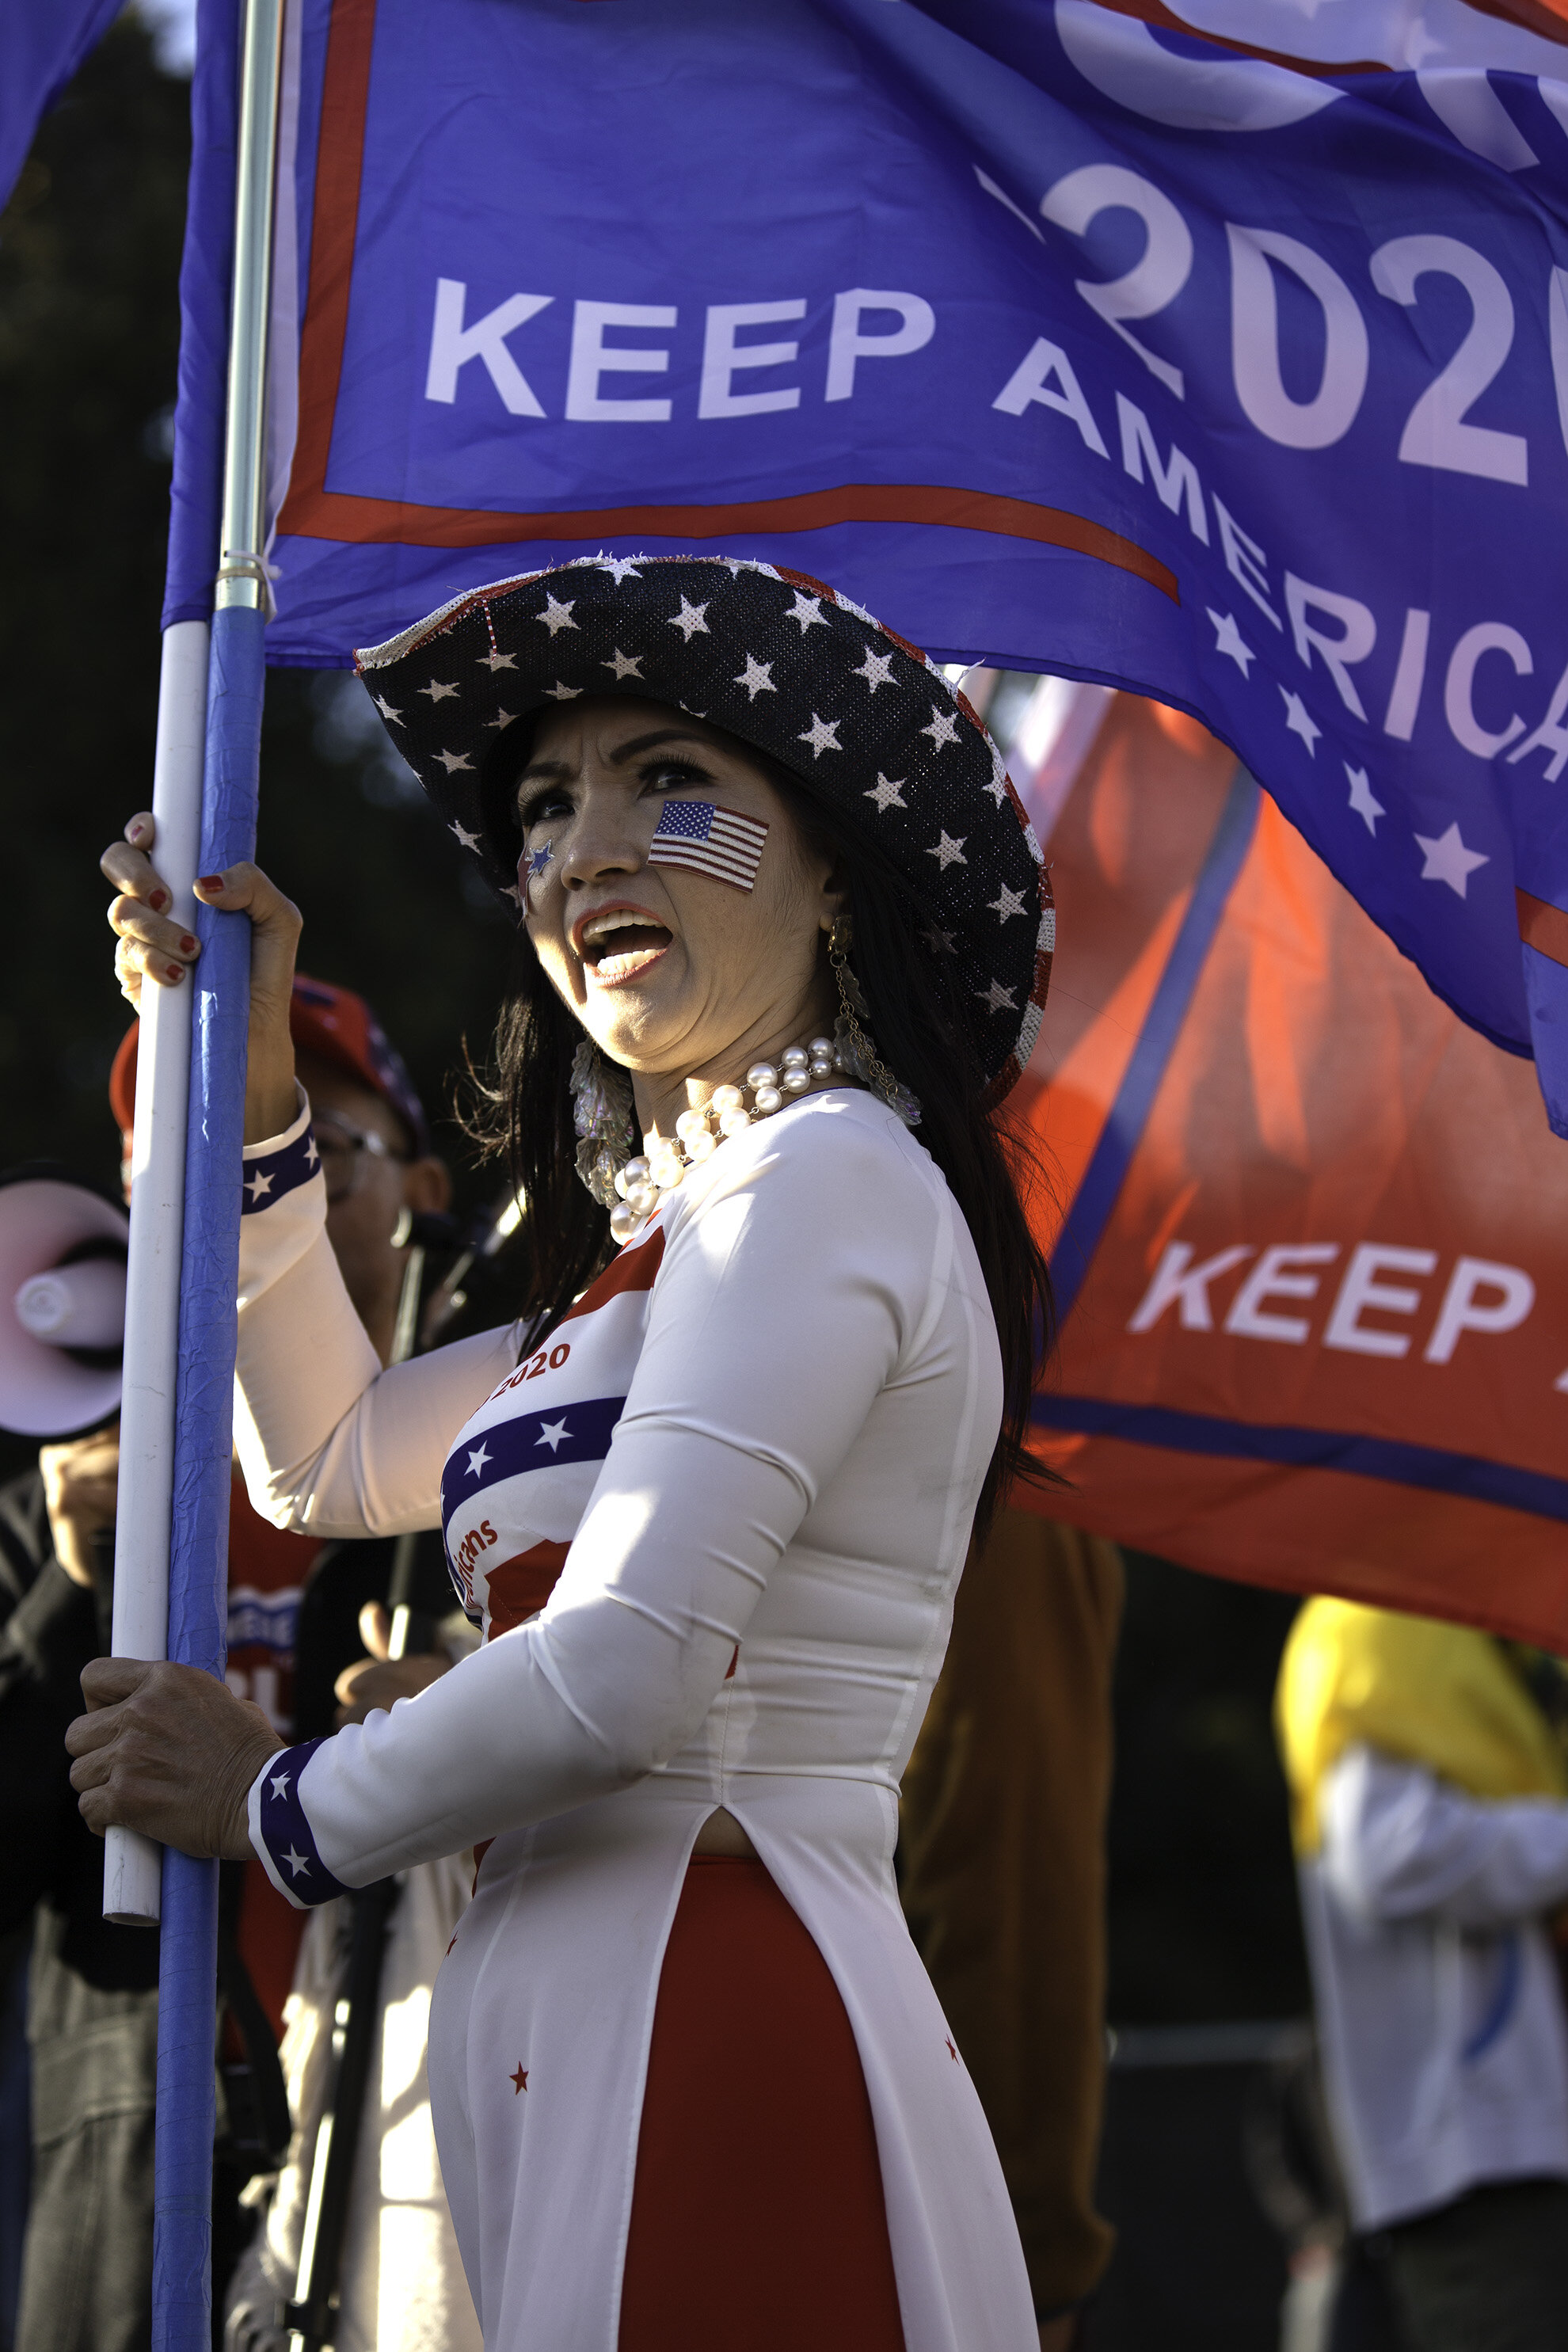   A Vietnamese-American woman supporting President Donald Trump during the demonstration in Beverly hills, after Joe Biden was elected 46th President of The United States of America on Saturday, November 7, 2020 in Los Angeles, Calif. Calif.   